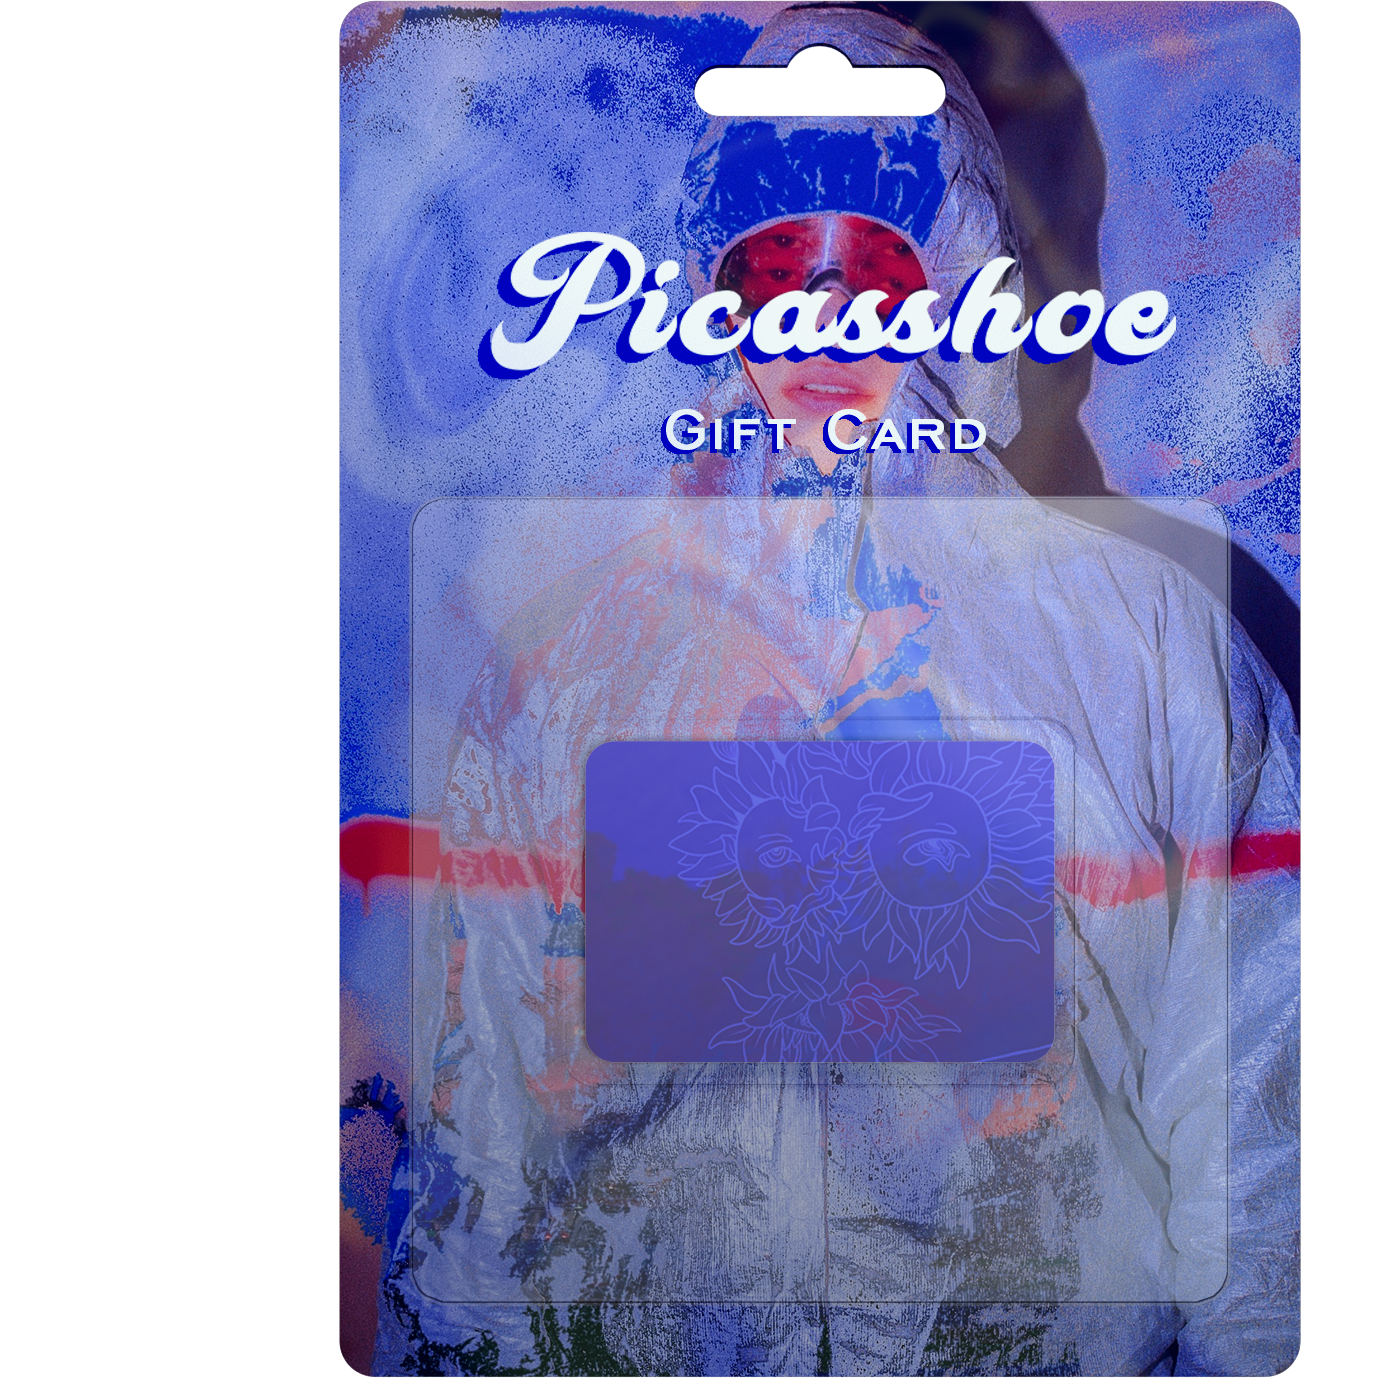 Picasshoe Gift Card - Picasshoe Clothing